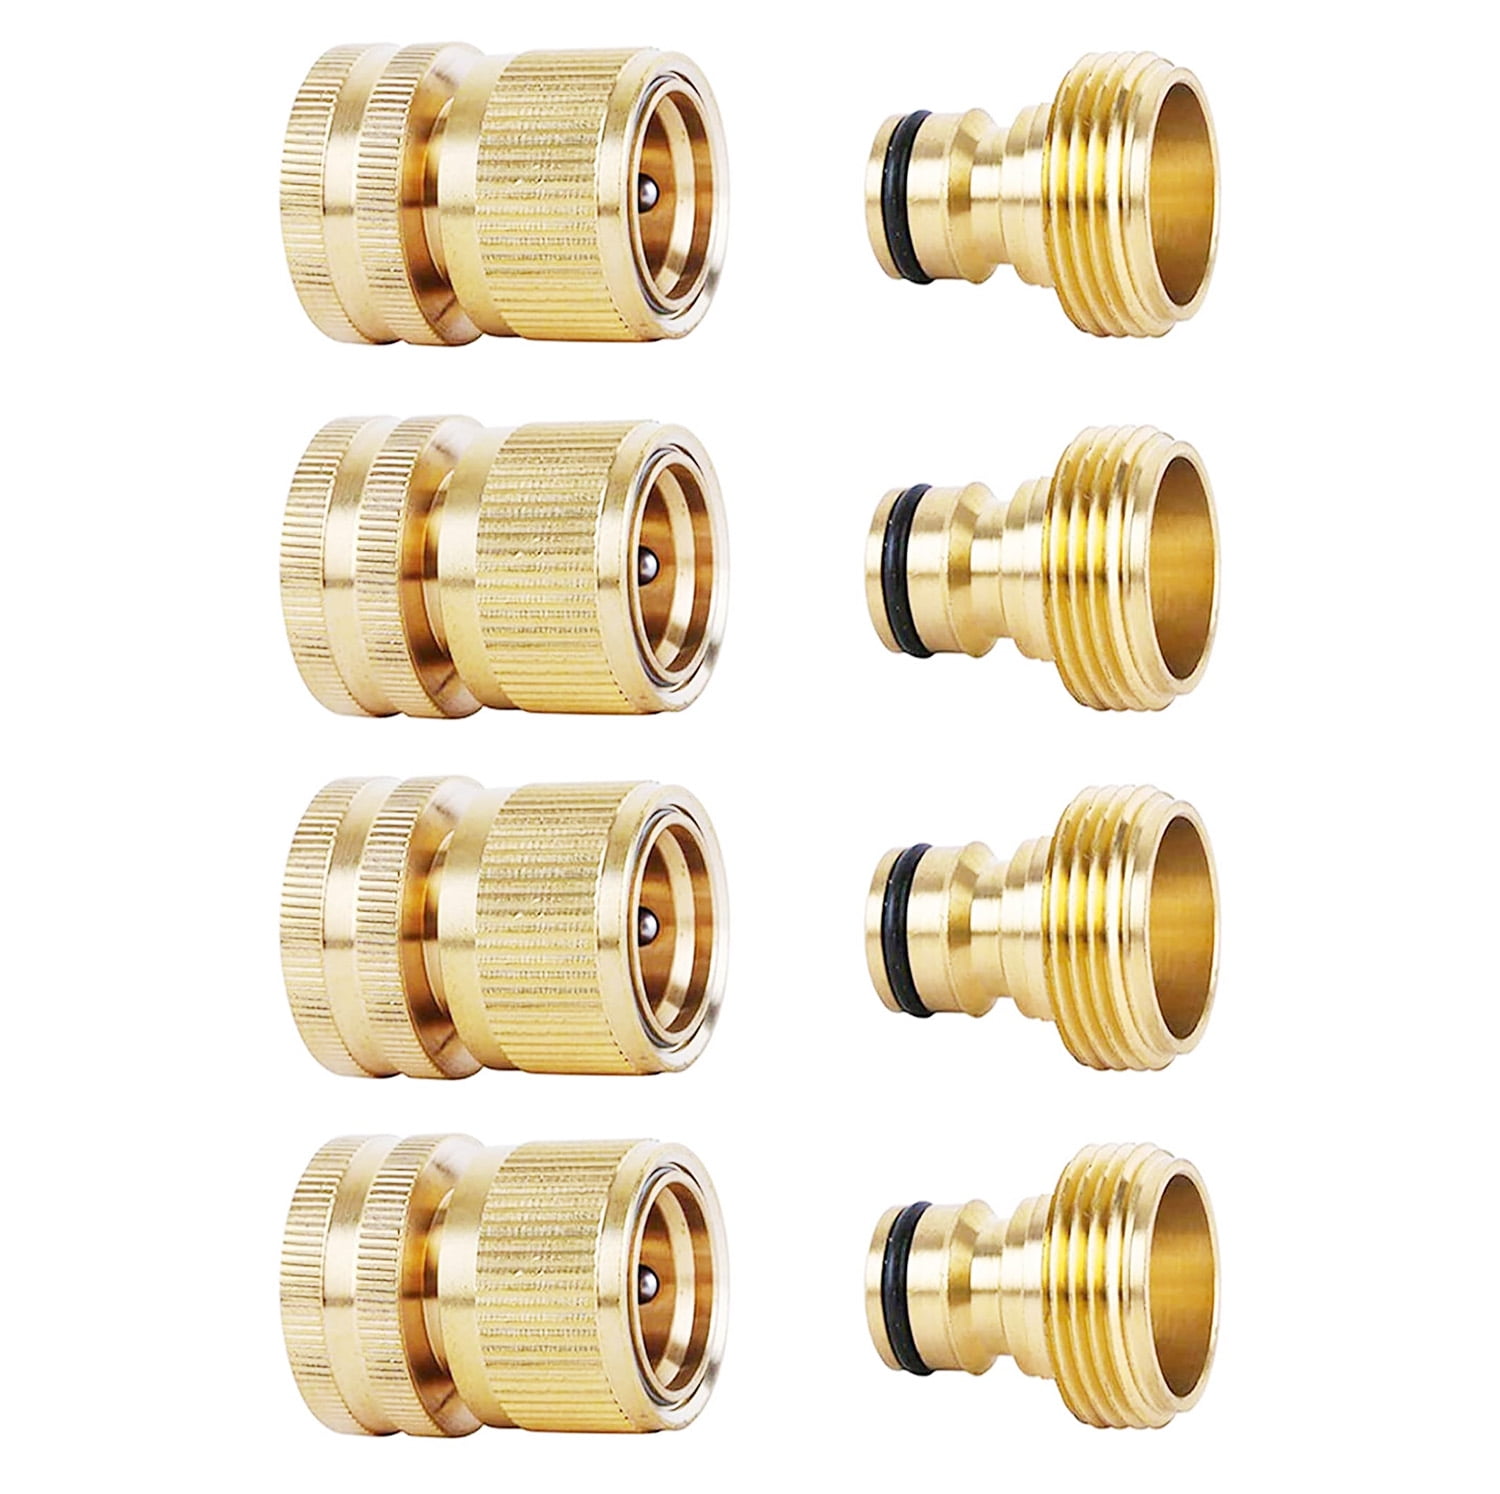 OUTSIDE TAP GARDEN HOSE CONNECTOR BRASS 3/4" THREADED QUICK FIX METAL HOSE PIPE 